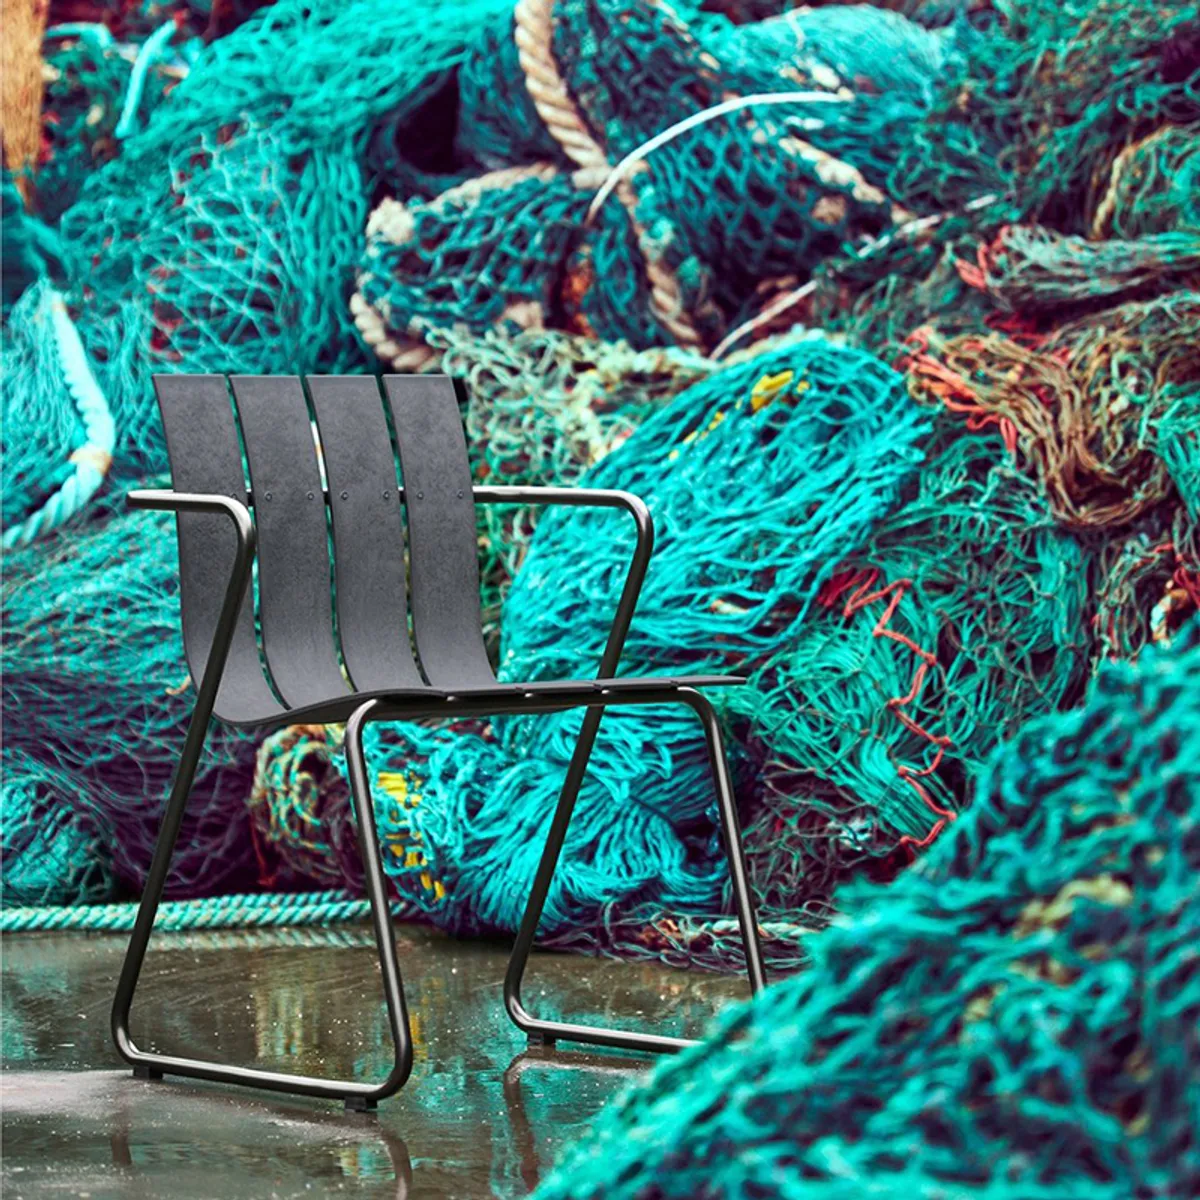 Ocean Chair Recycled Ocean Waste Outdoor Furniture Sustainable Design Insideoutcontracts 097